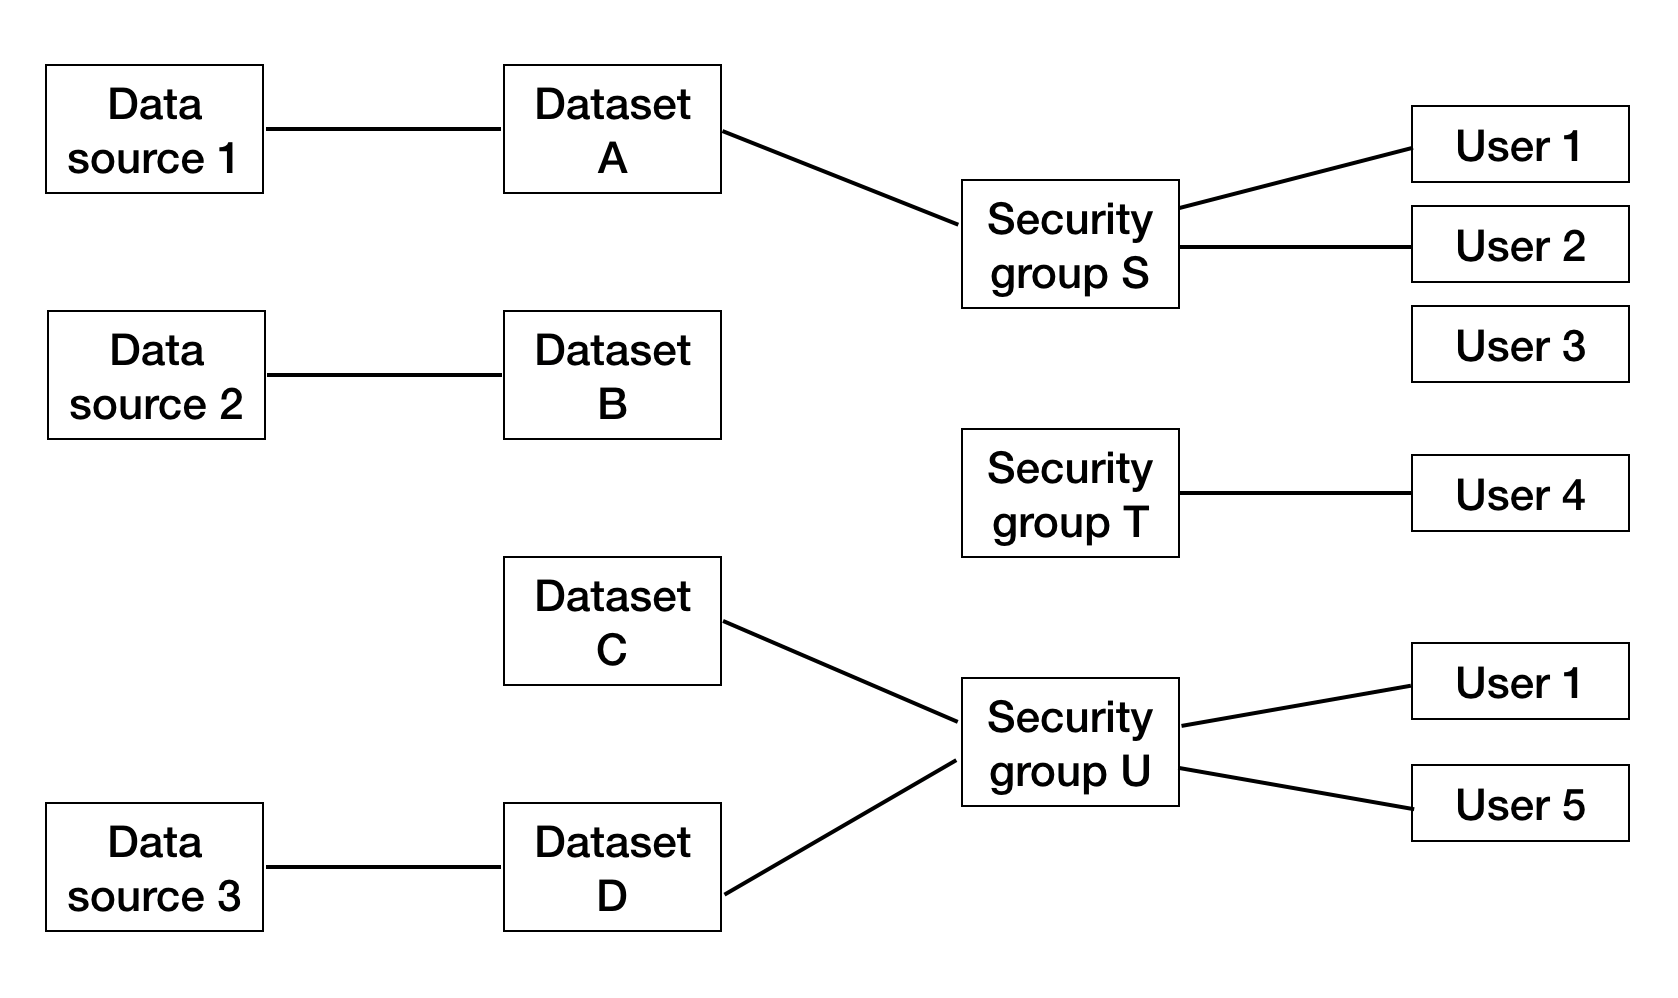 Relations between data sources, datasets, security groups, and users